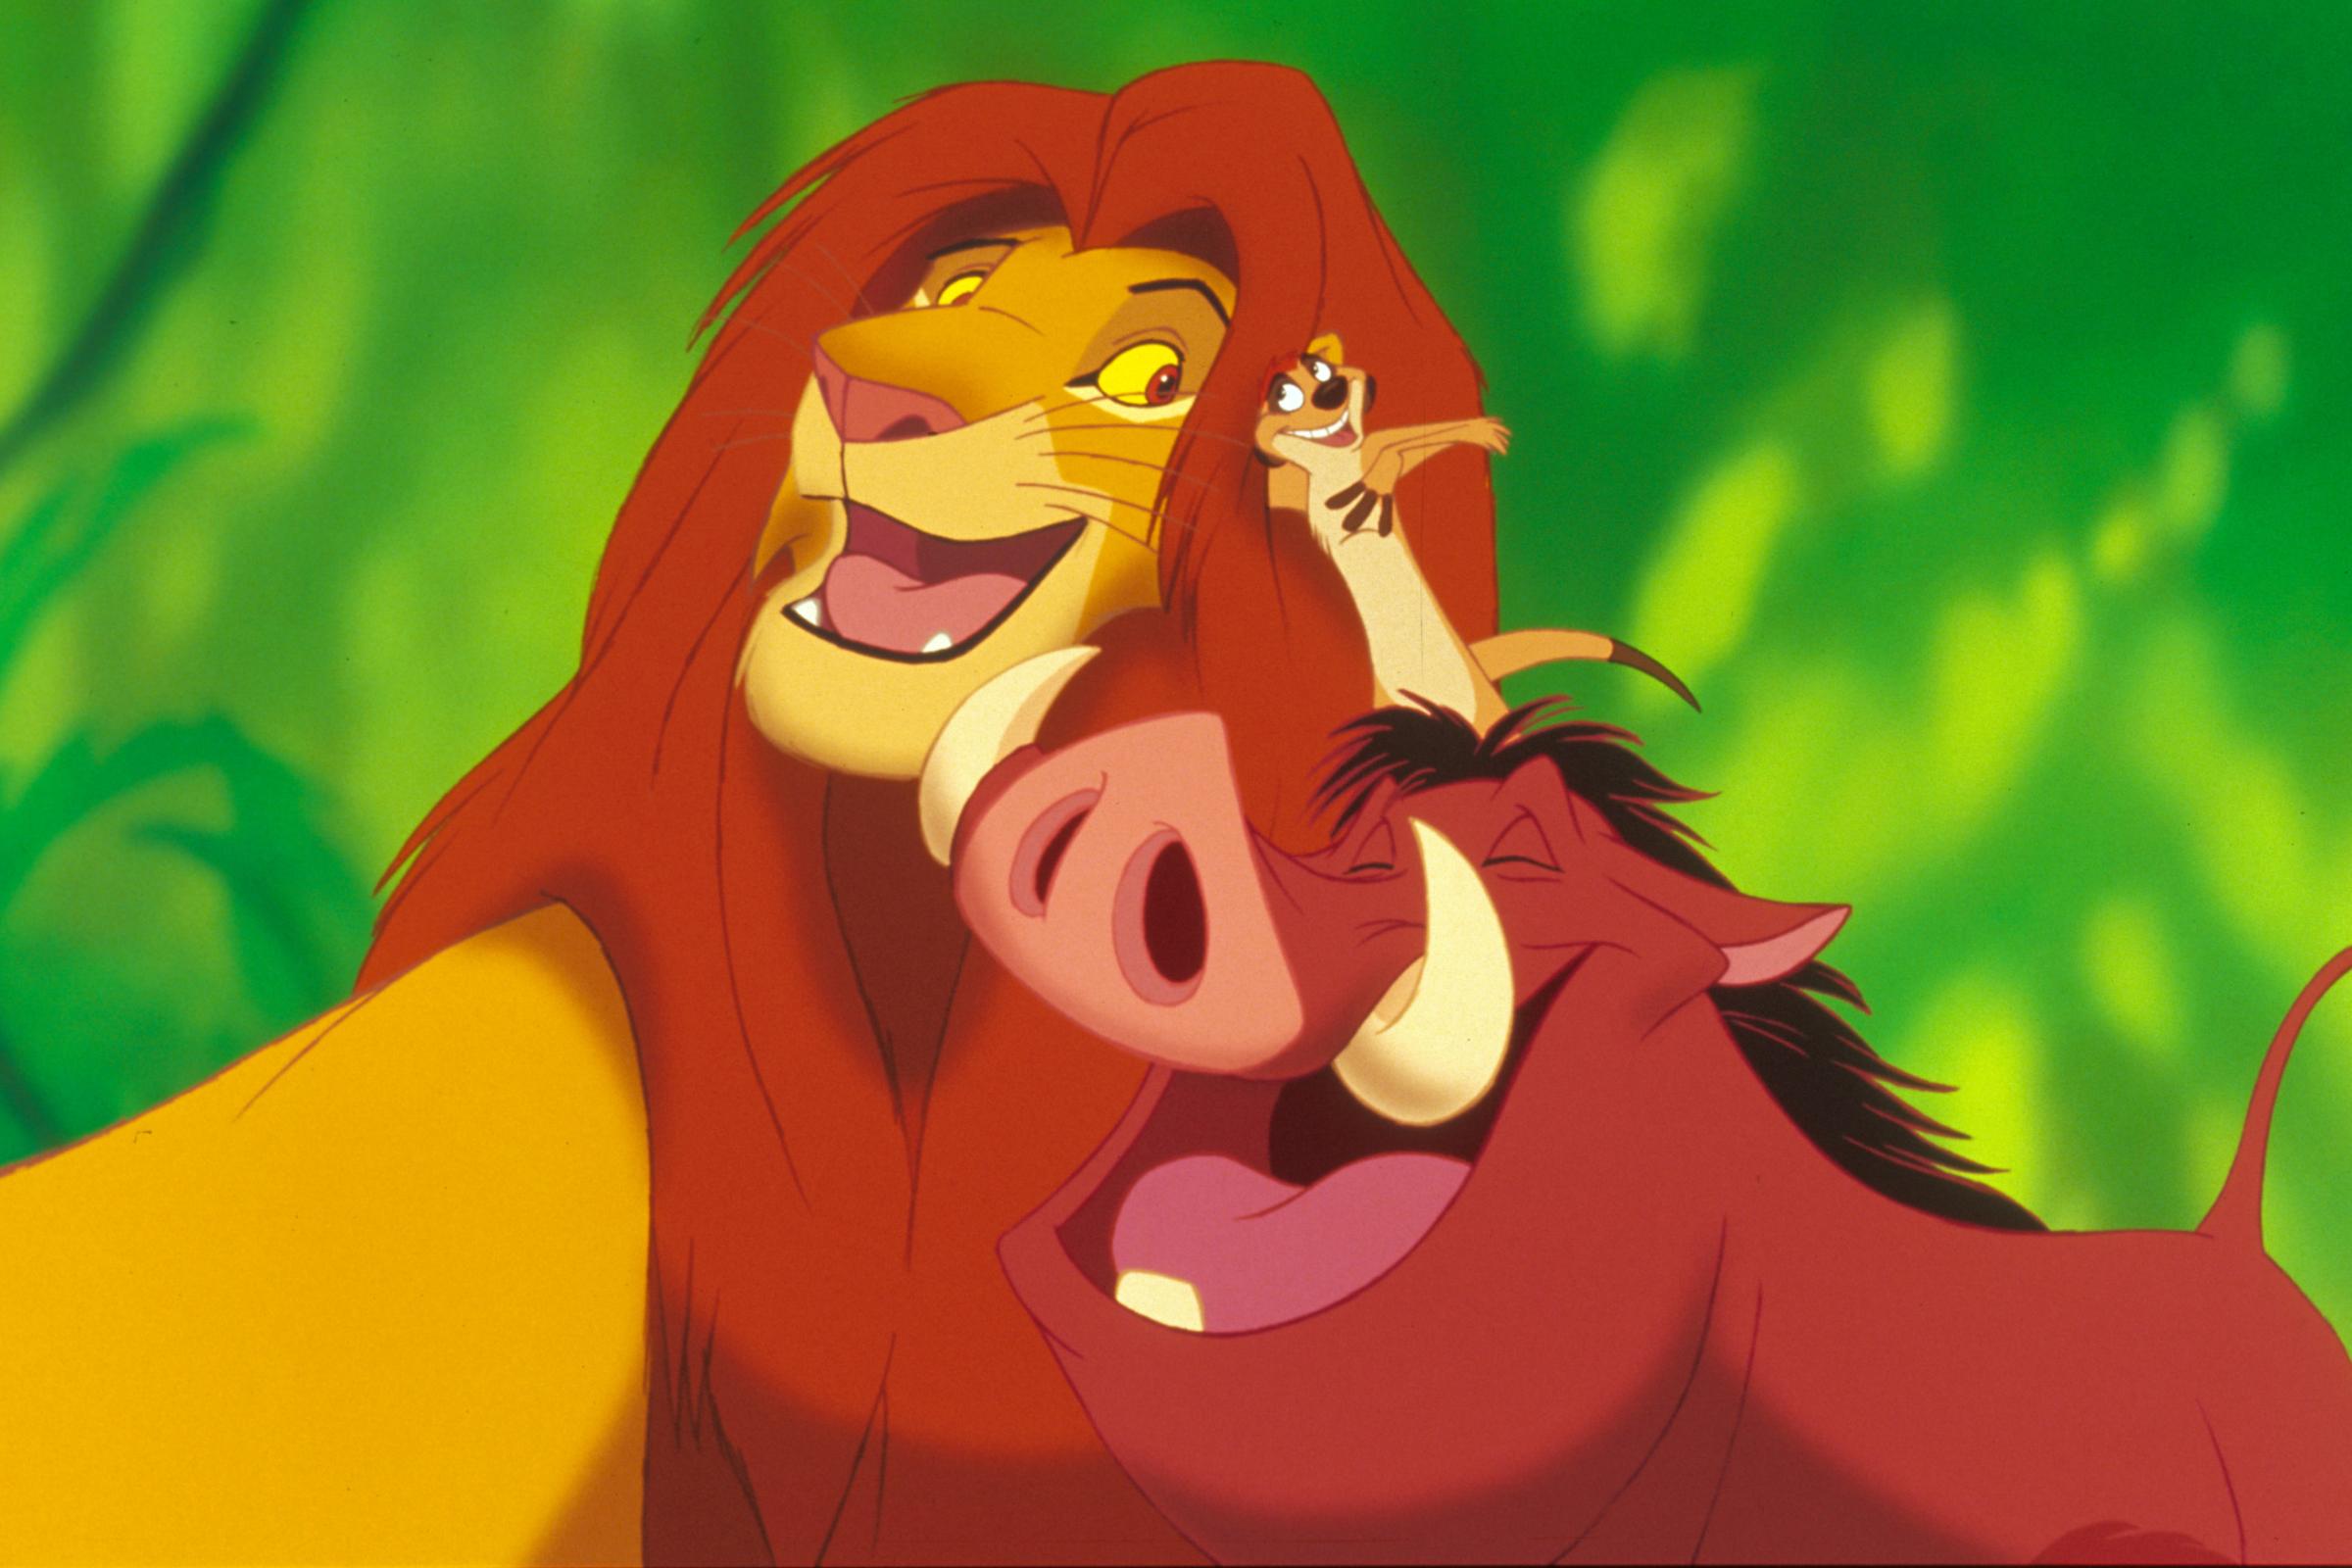 Movie: The Lion King, 1994; Play: The Lion King, 1997.